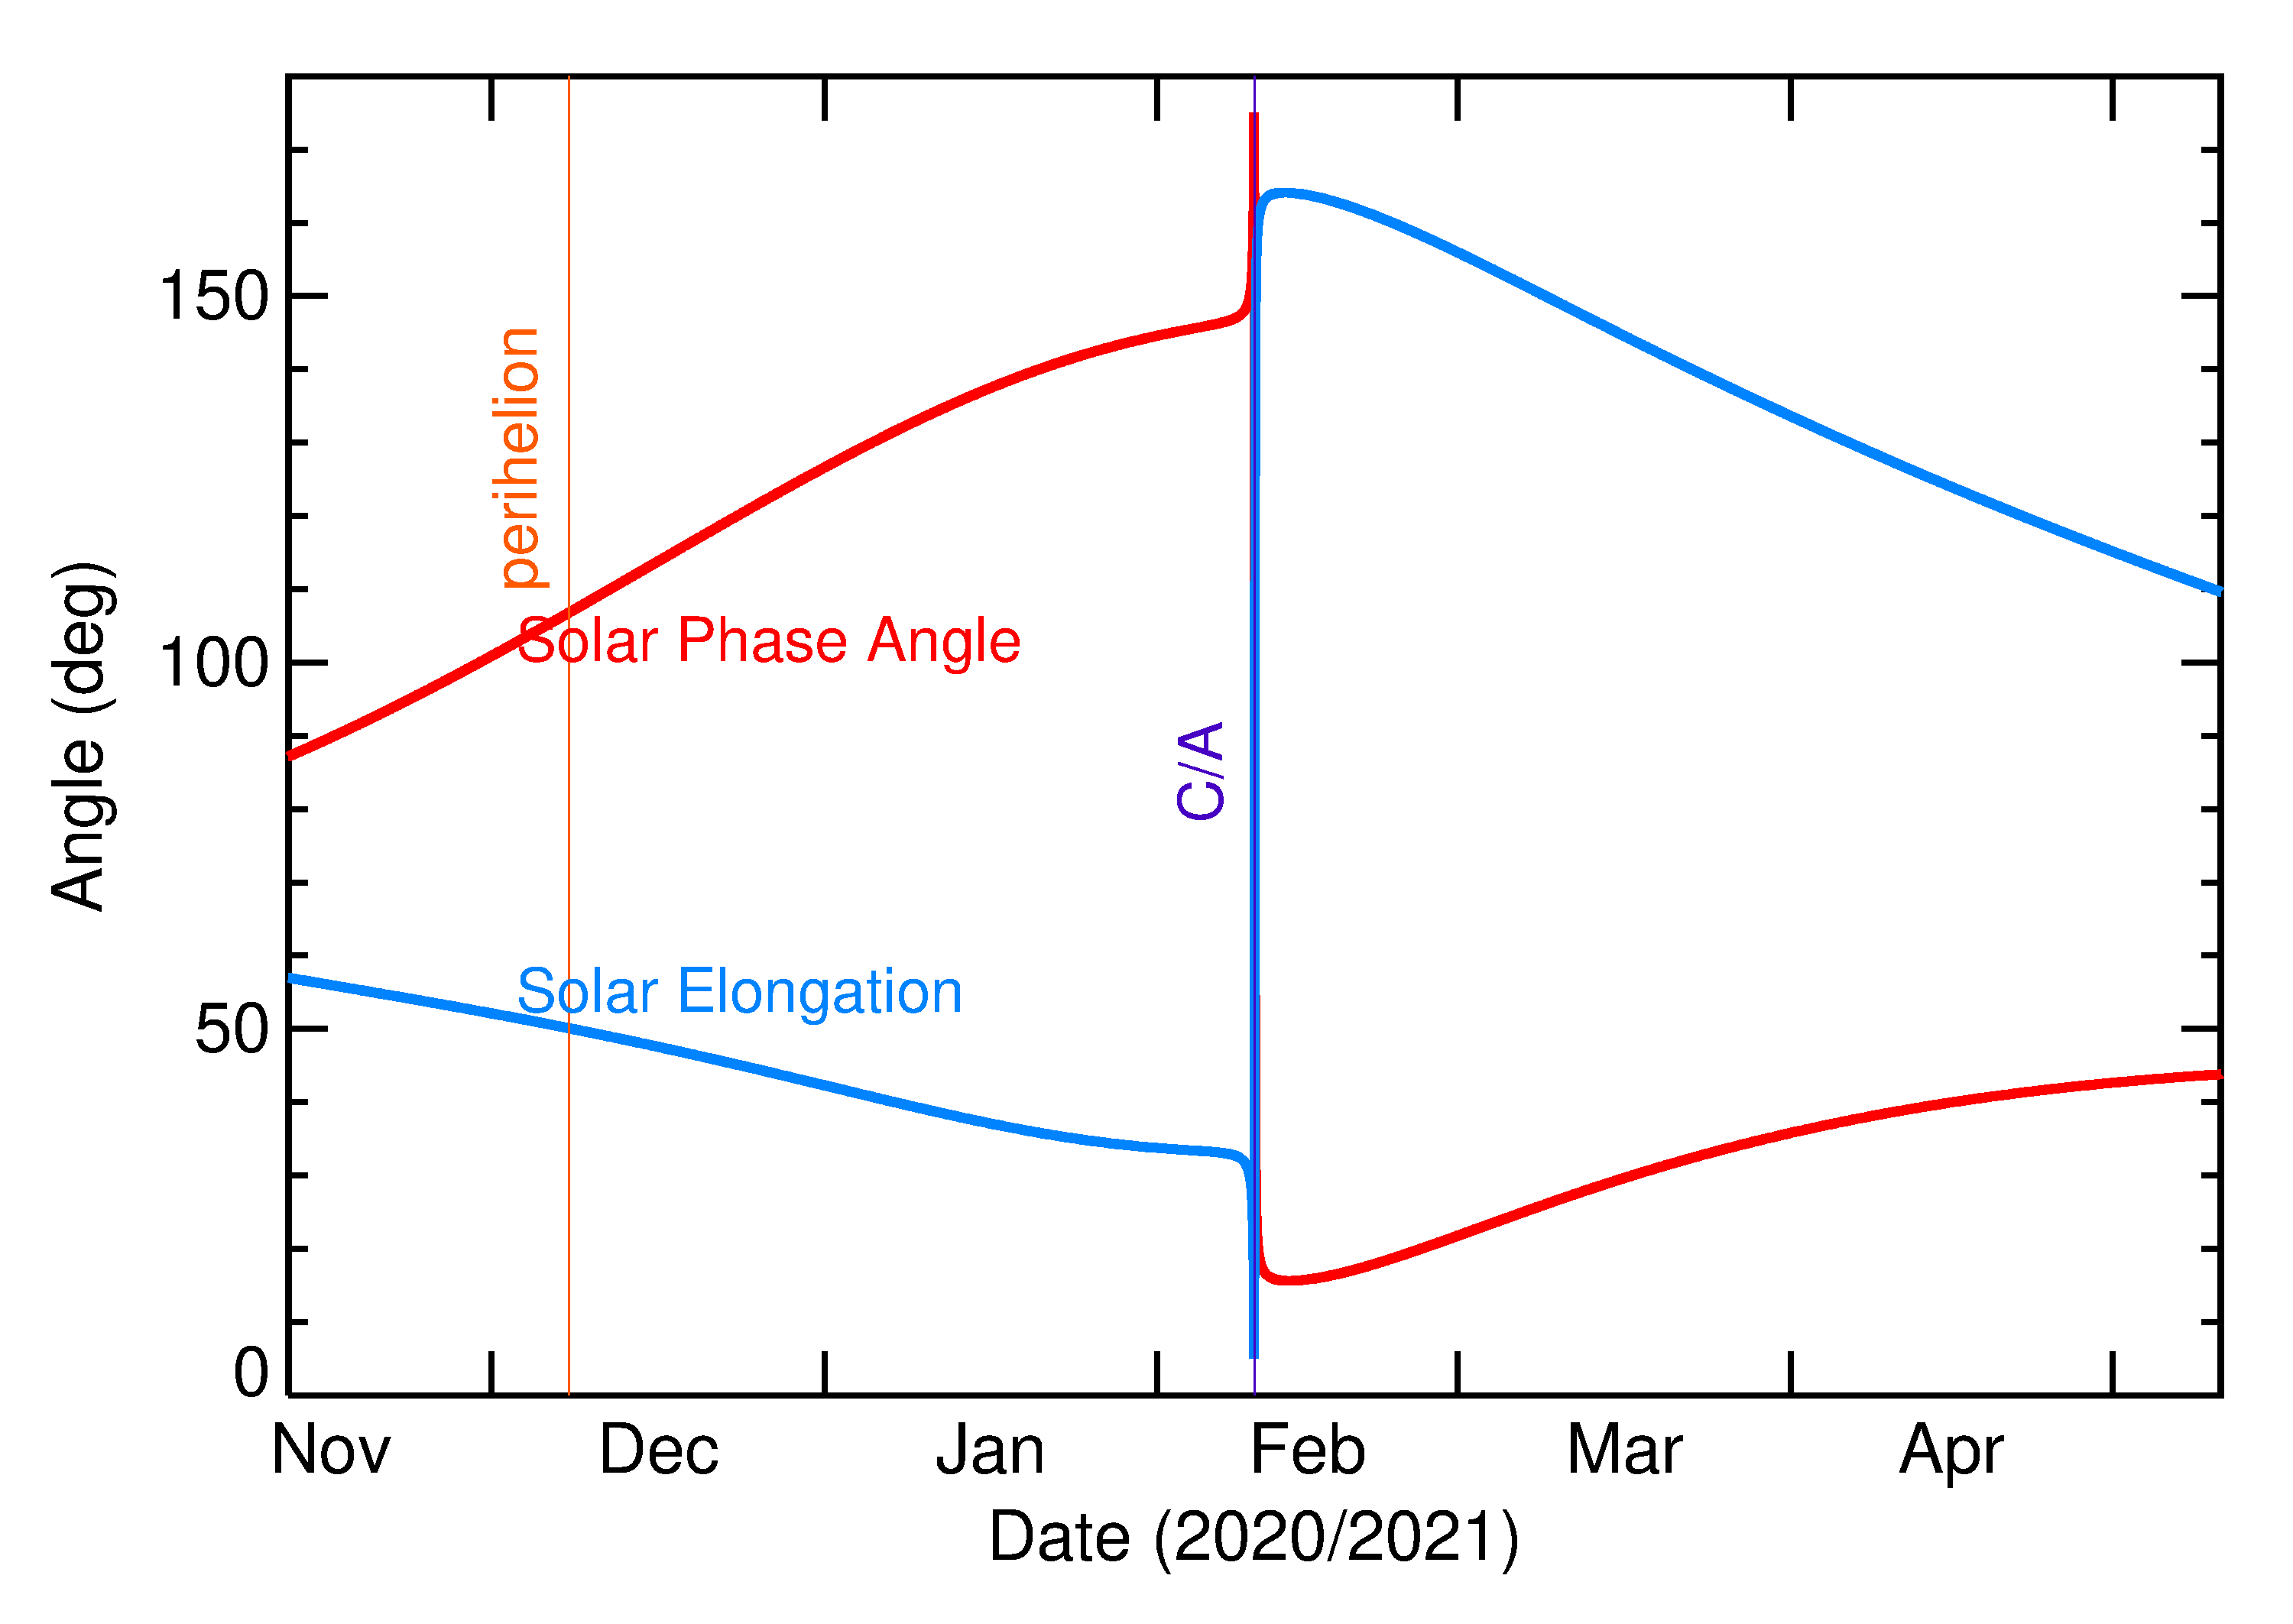 Solar Elongation and Solar Phase Angle of 2021 CZ3 in the months around closest approach